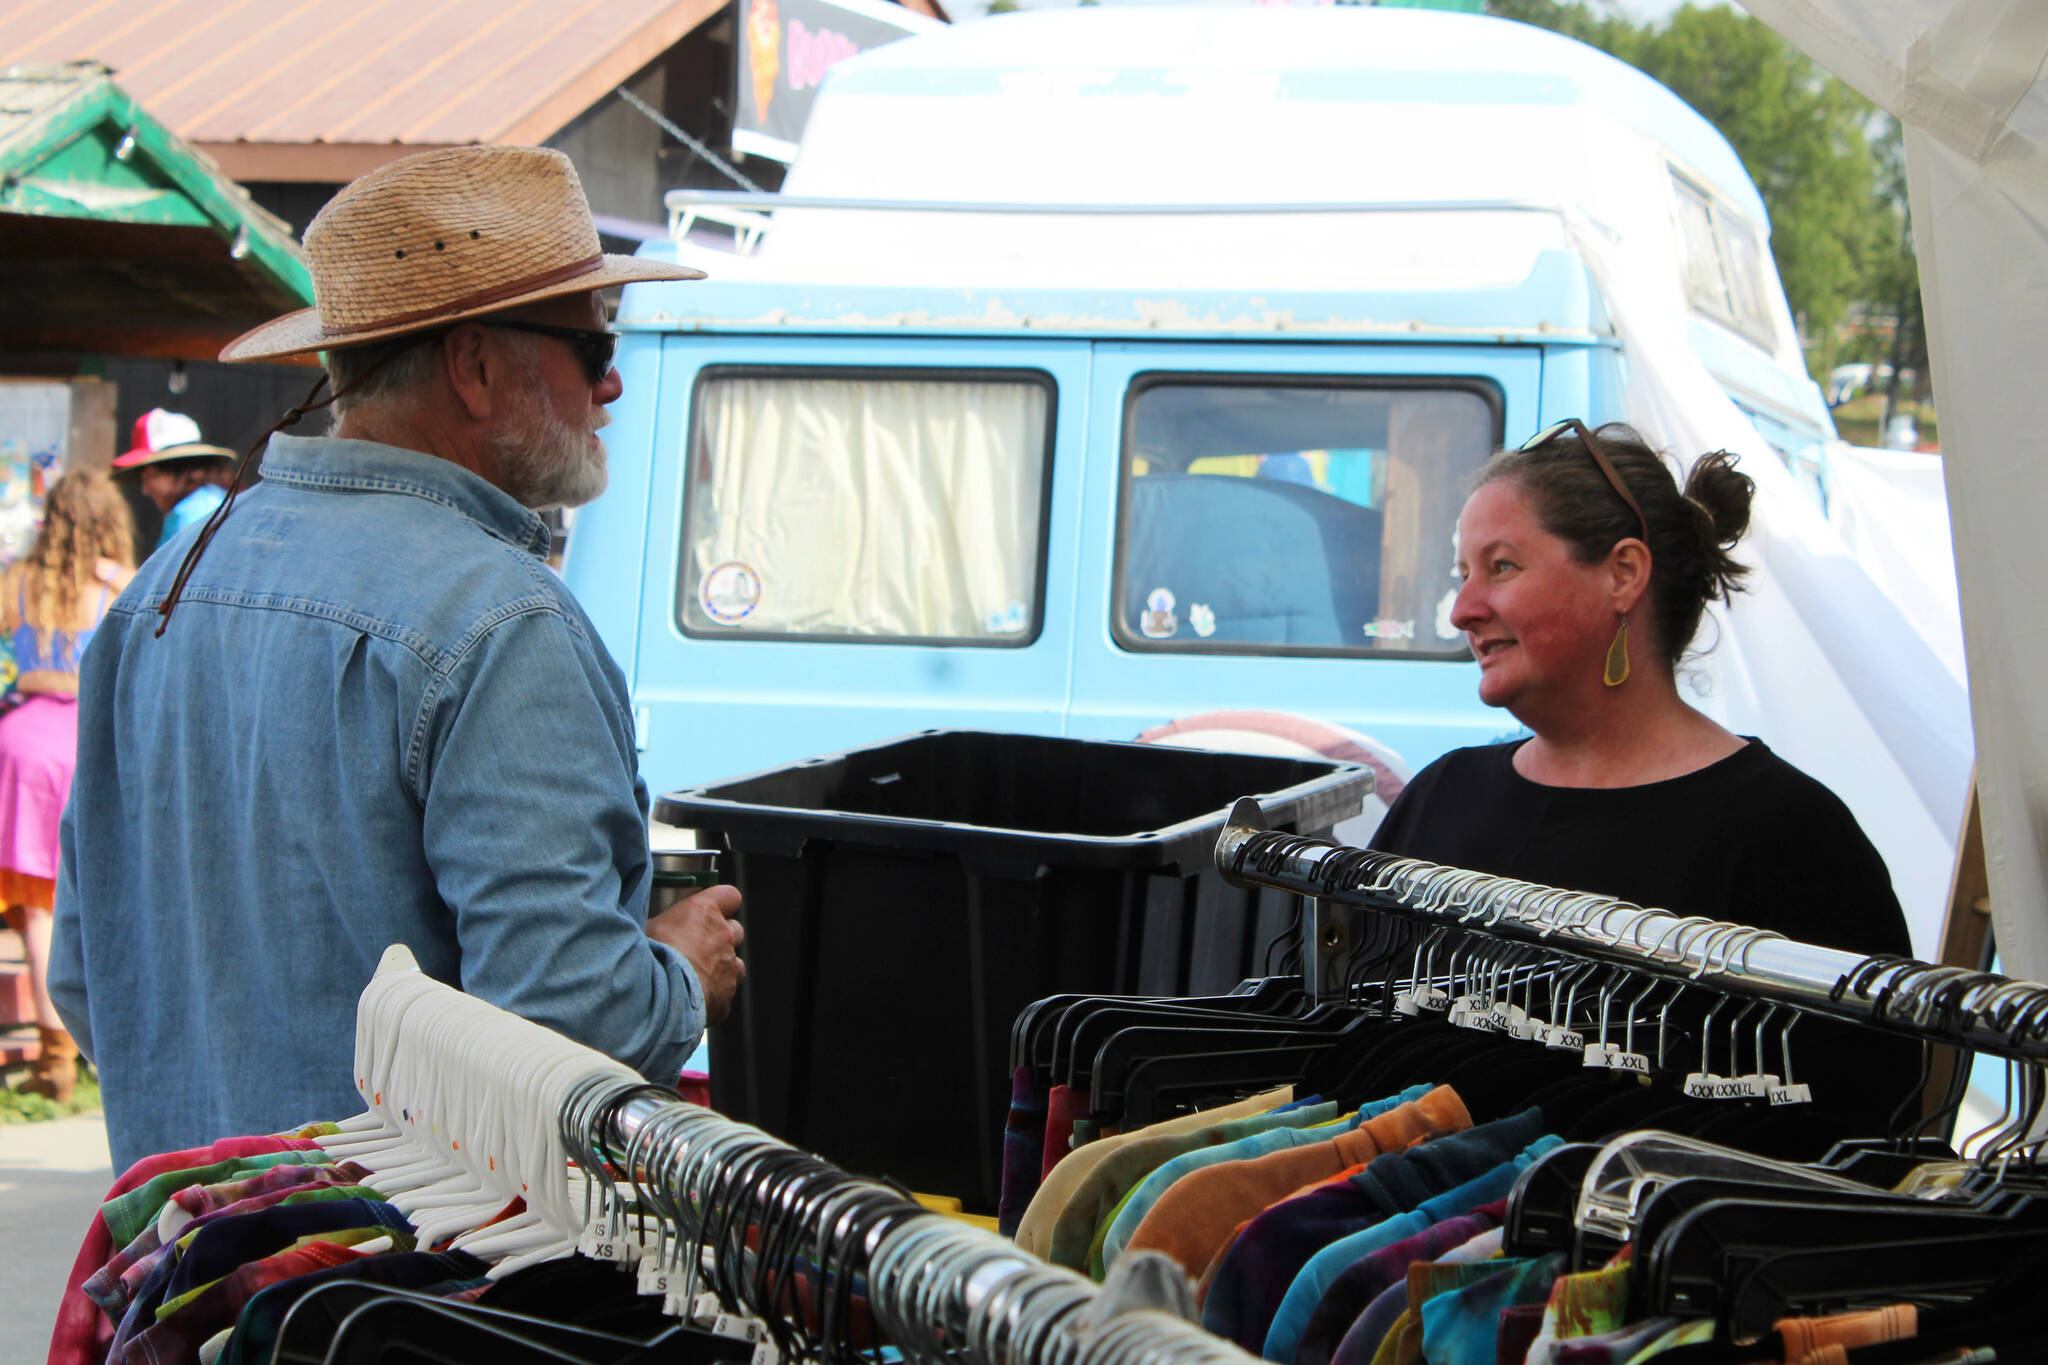 Drunken Forest Tie Dye owner Jen Luton (right) assists a customer at her vendor booth at Salmonfest on Friday, Aug. 4, 2023 in Ninilchik, Alaska. (Ashlyn O'Hara/Peninsula Clarion)